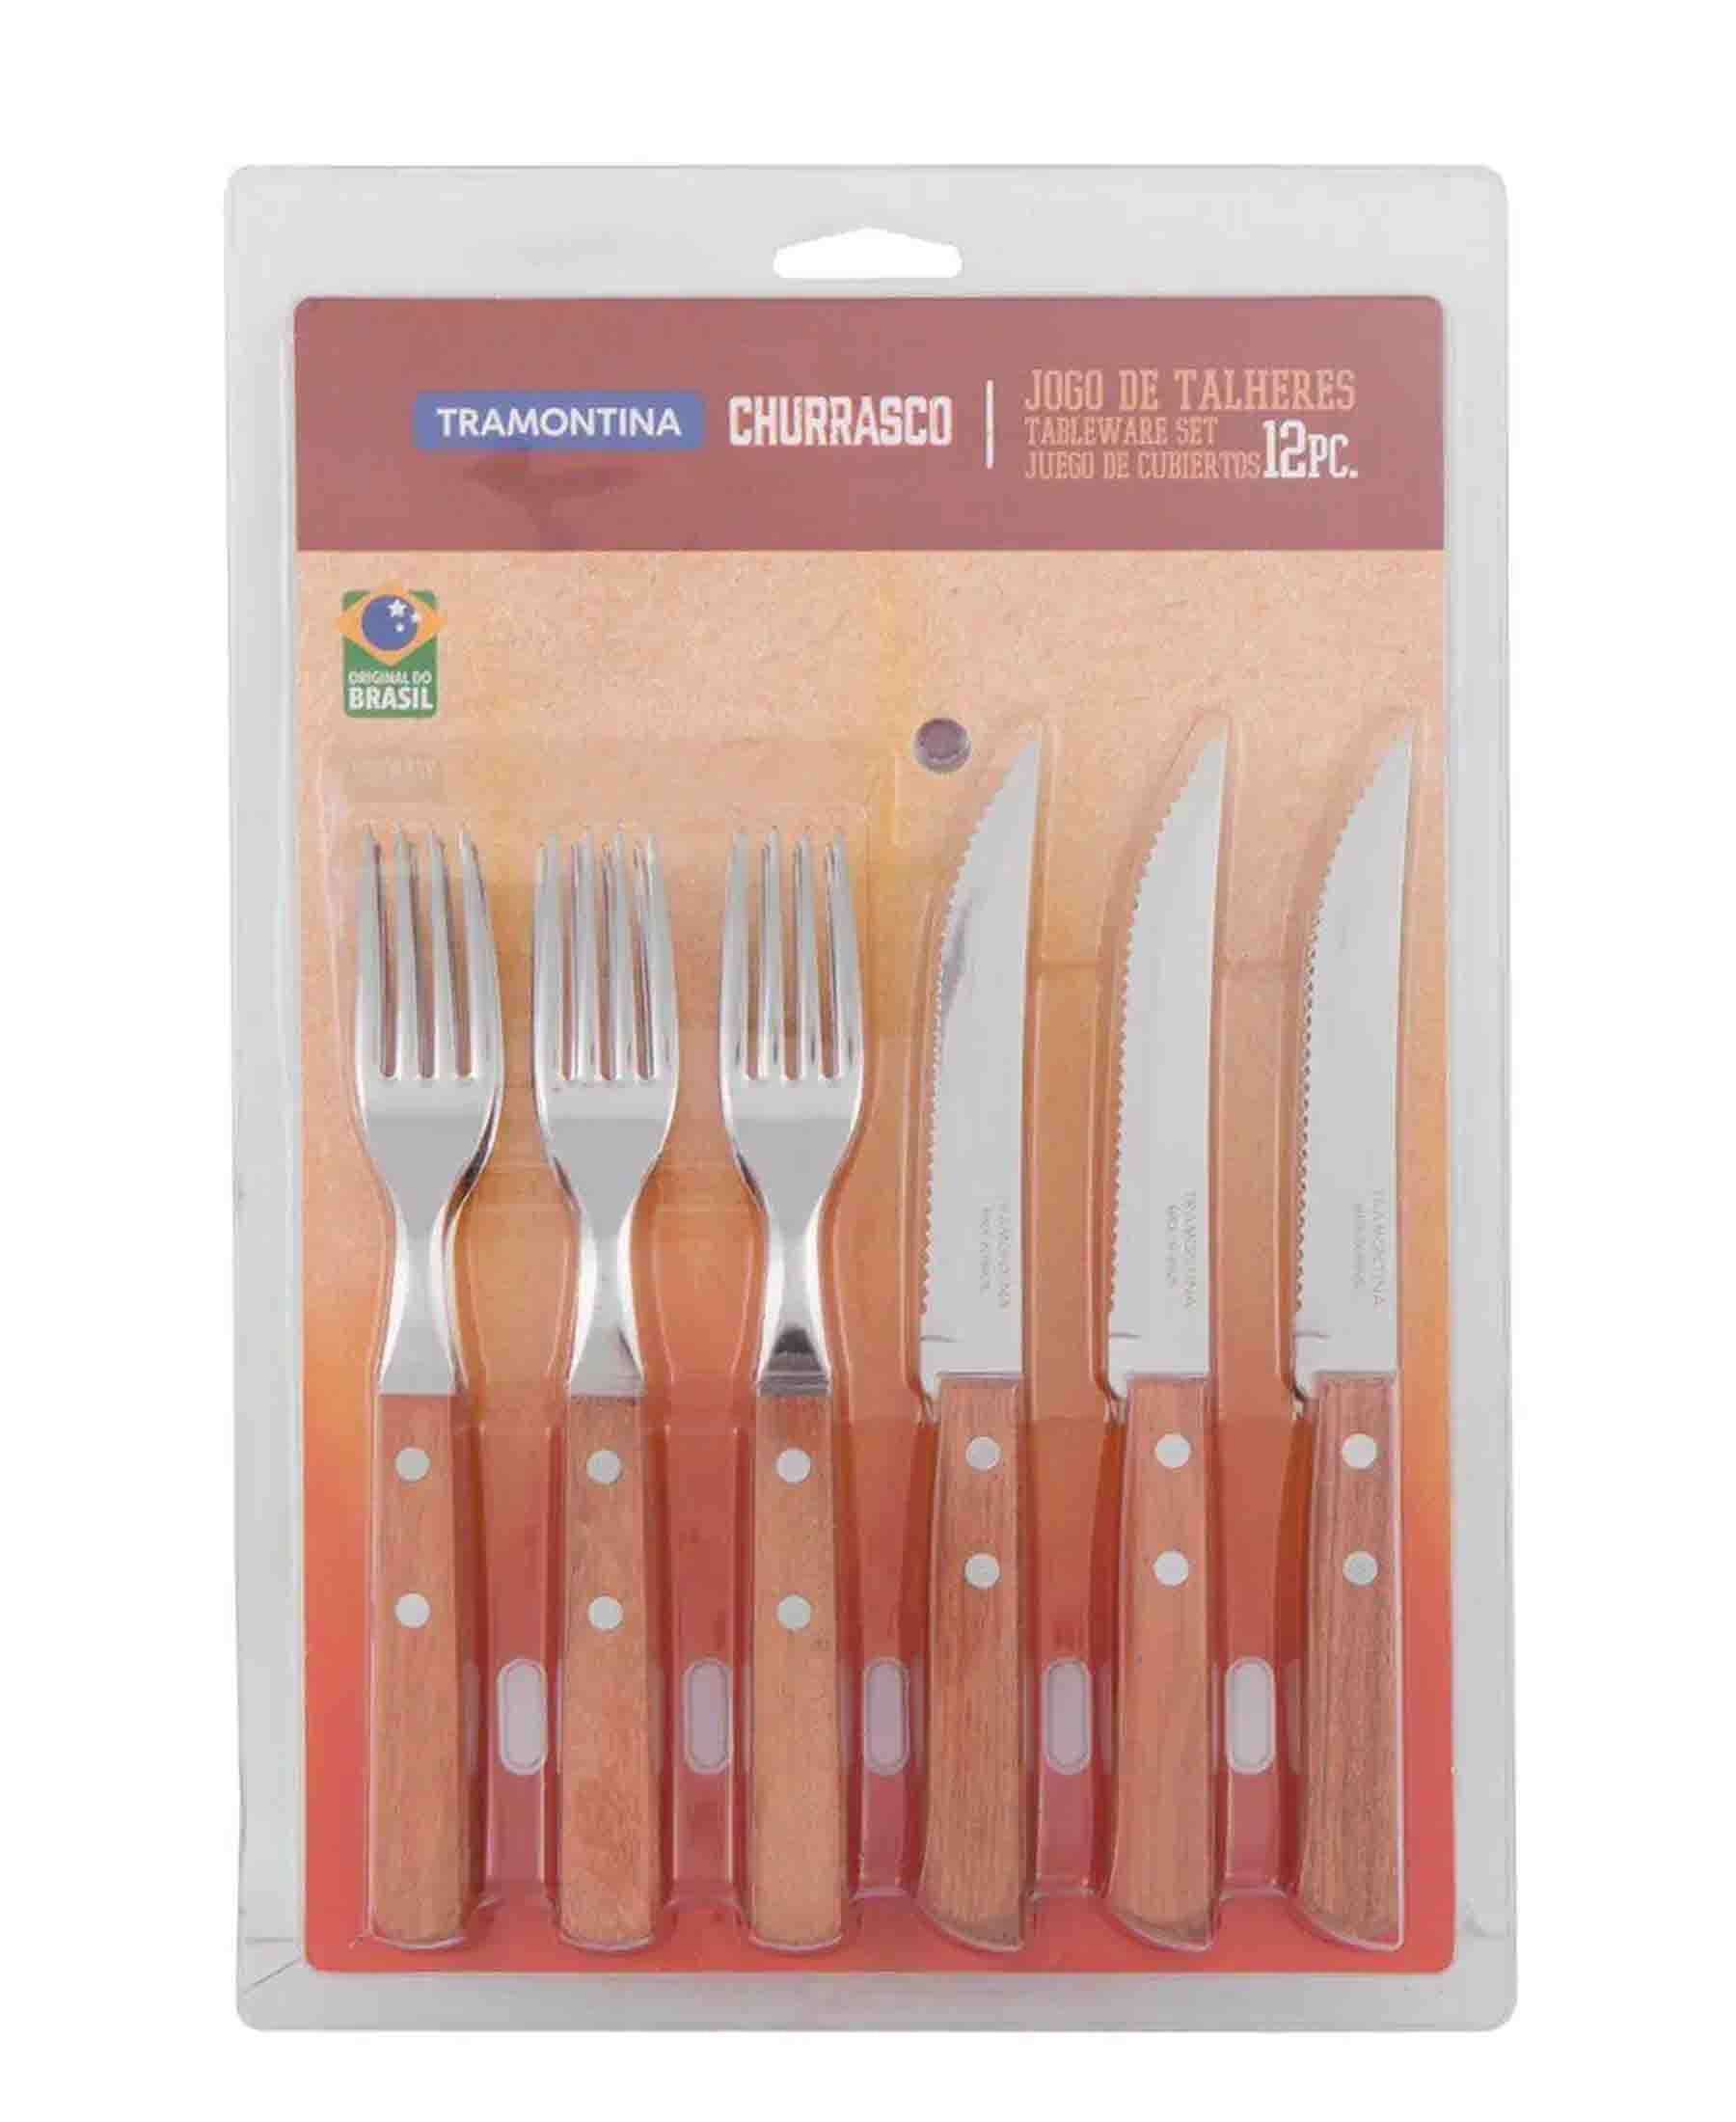 Tramontina 12 Piece Barbecue Cutlery Set - Brown